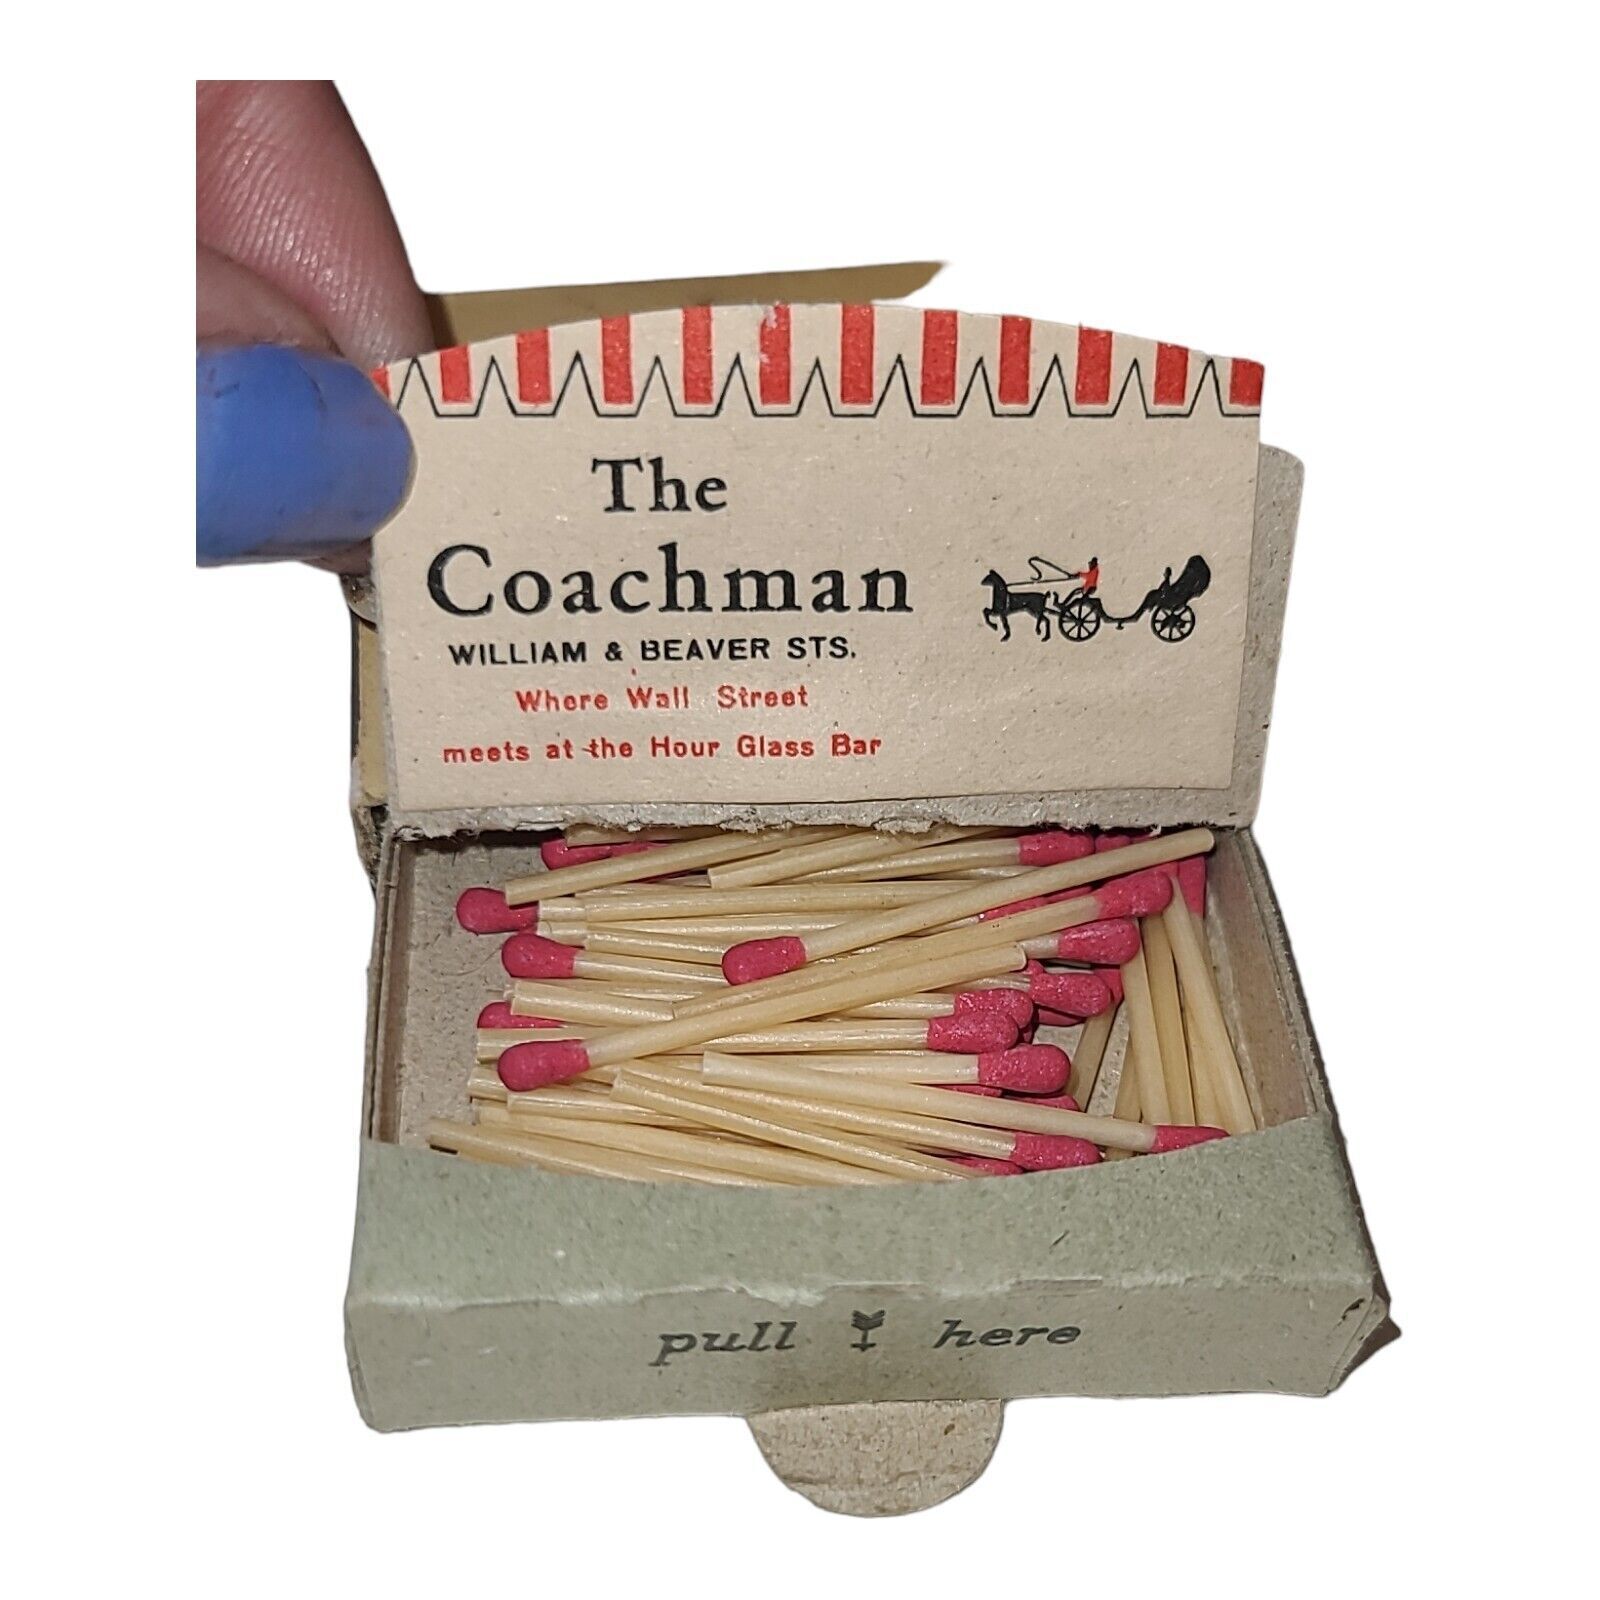 Vintage The Coachman Restaurant New York City Pull Here Matchbox With Matches